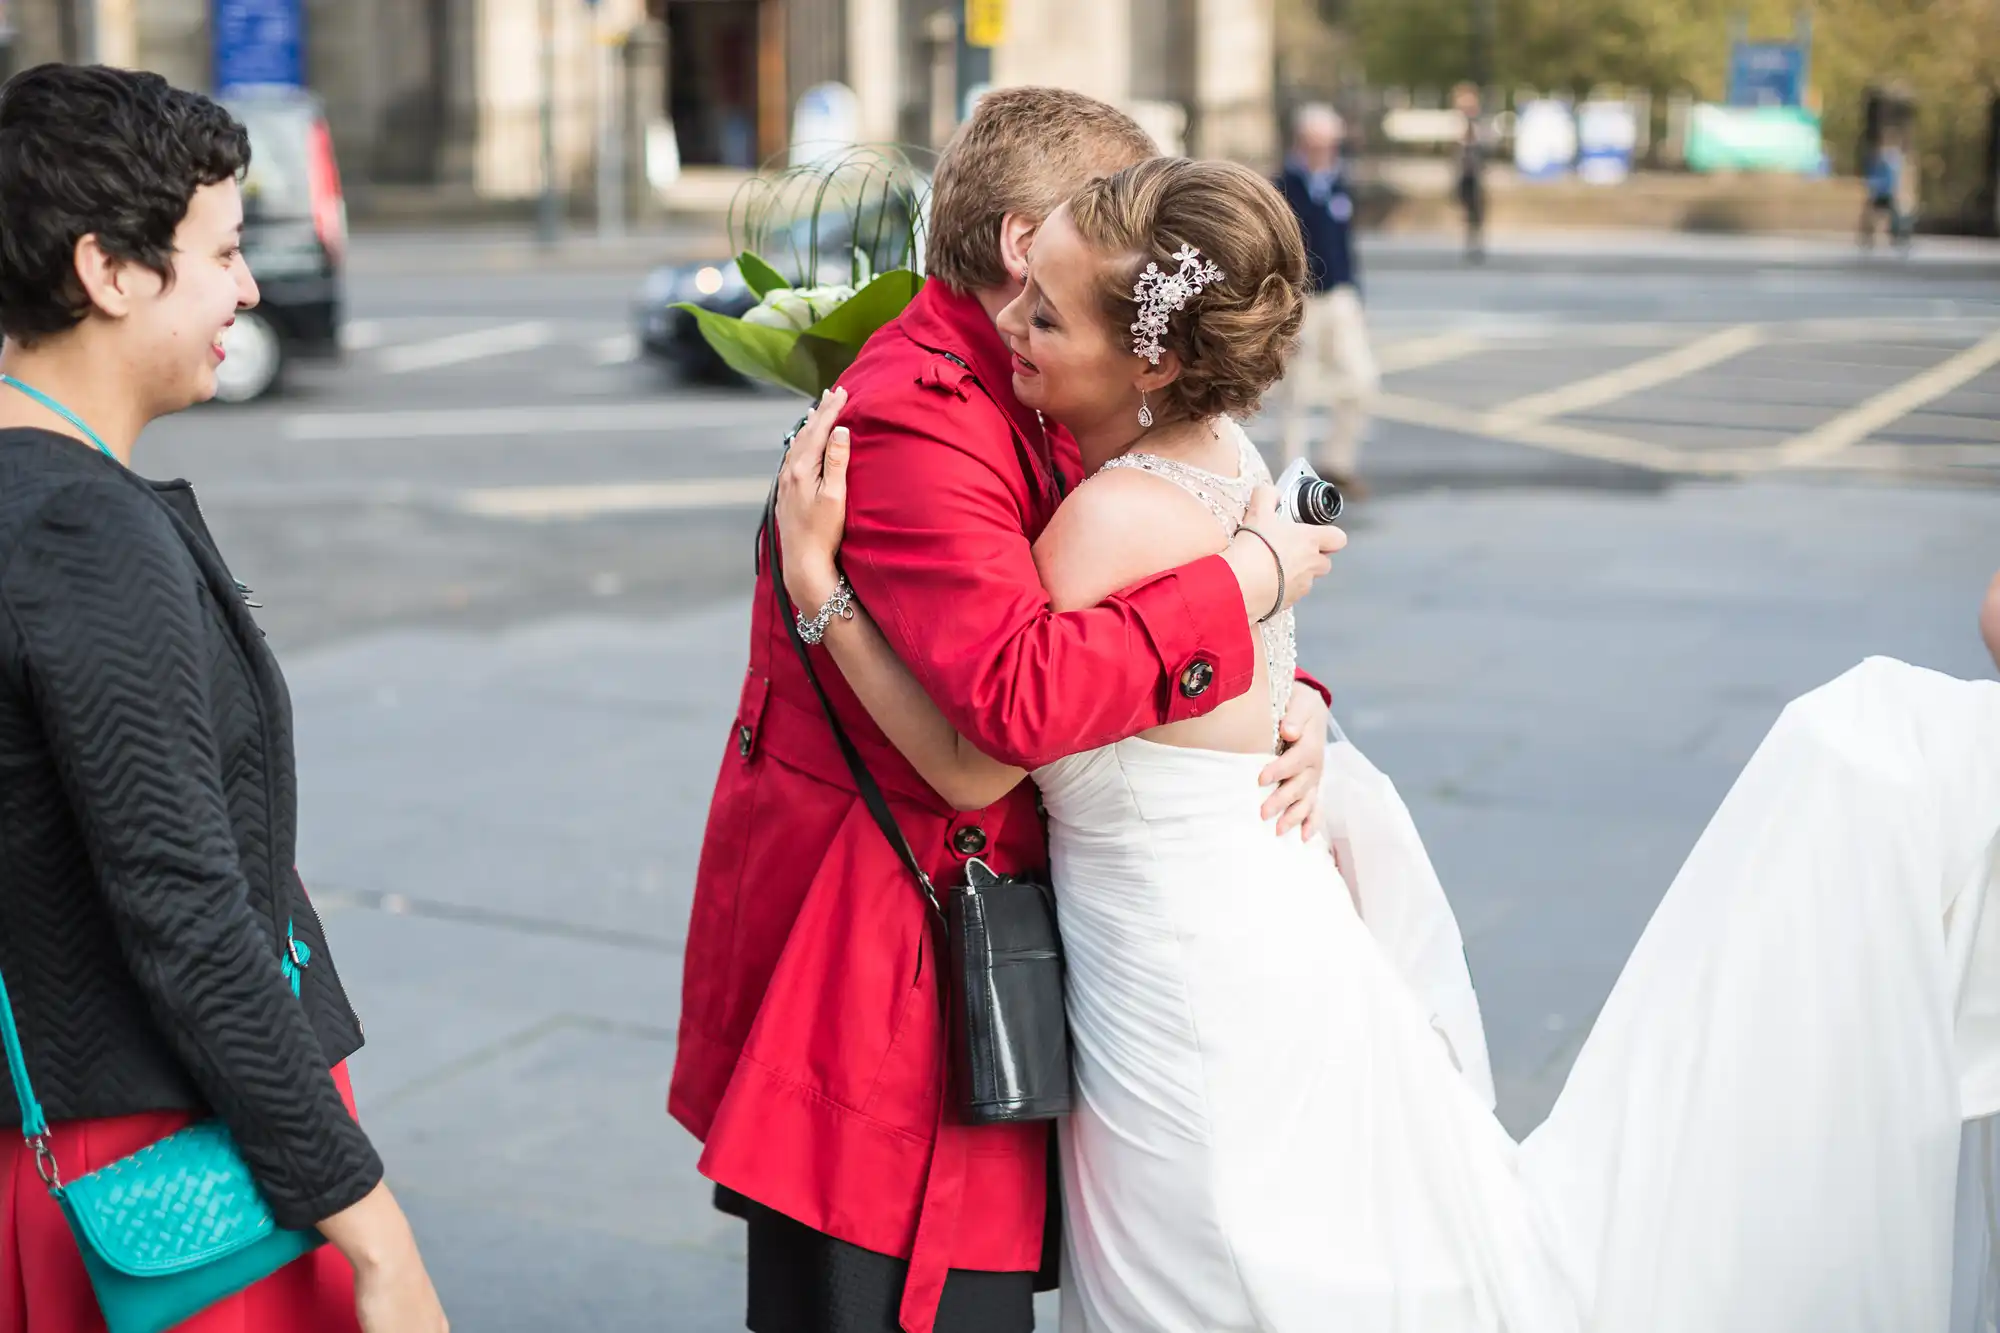 A bride in a white dress embracing a woman in a red jacket on a city street, with bystanders watching.